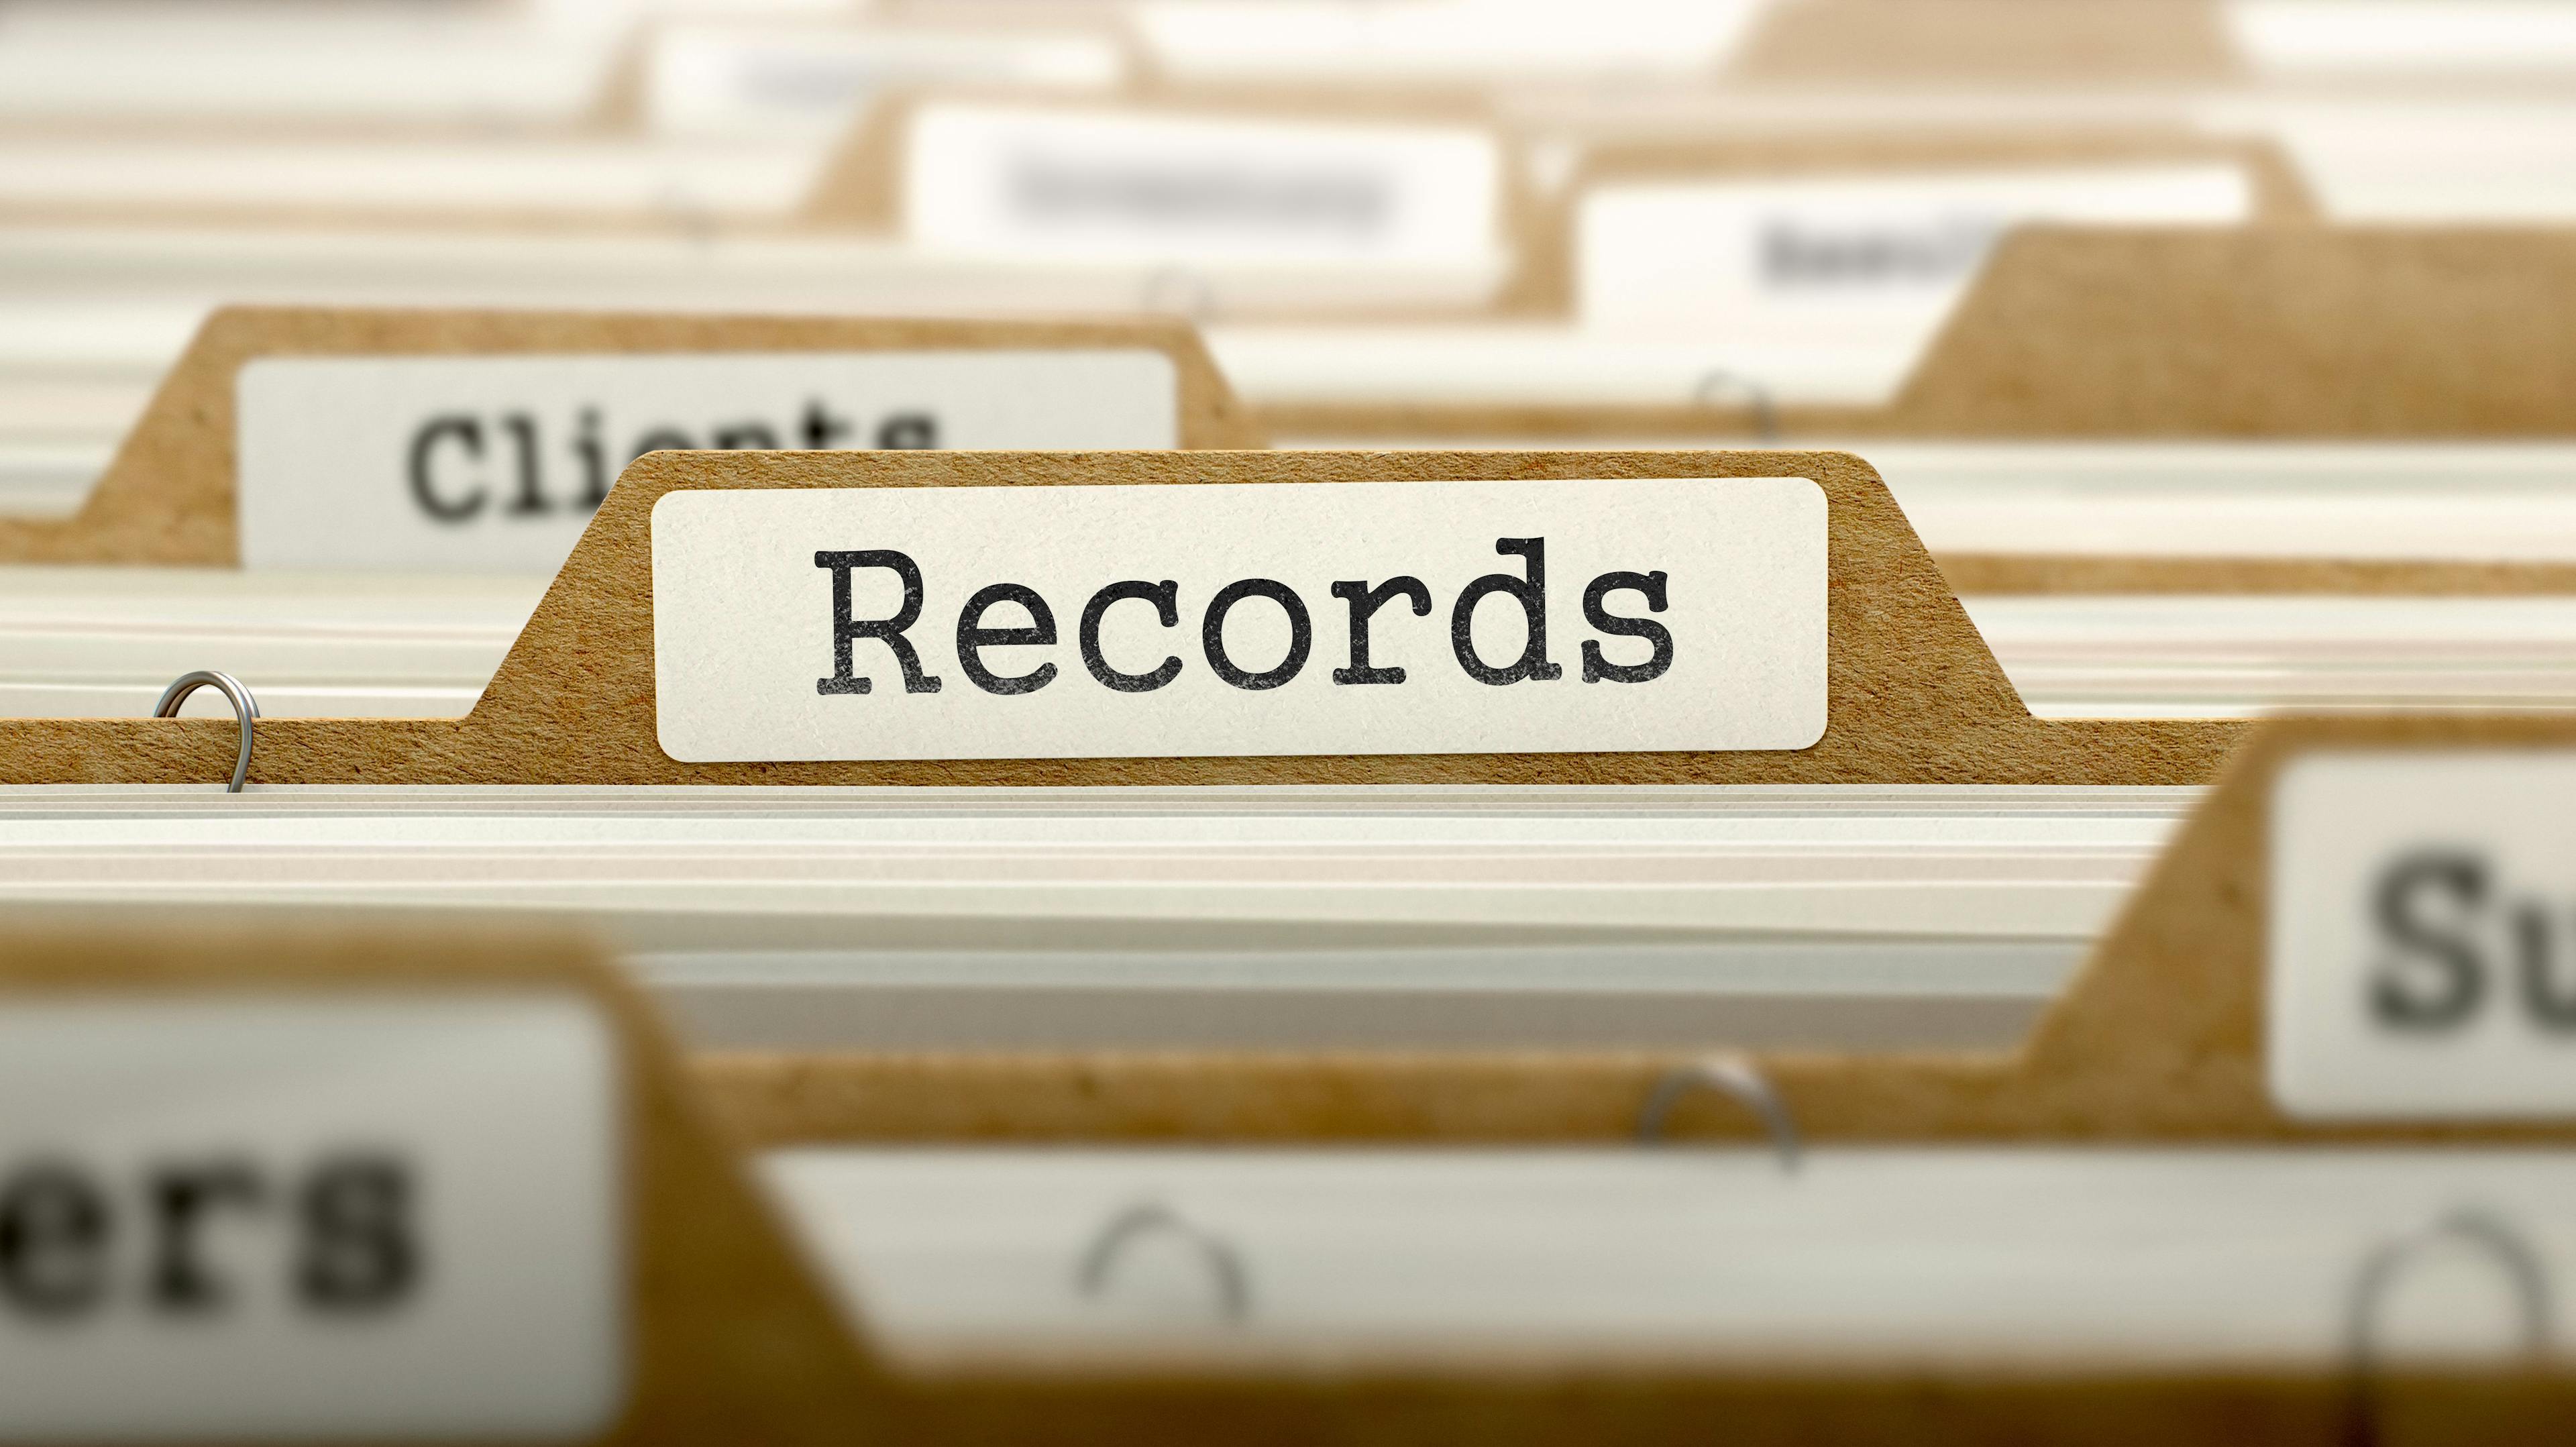 Are You Ready for the Latest Data Integrity Guidance? Part 1: Scope, Data Governance, and Paper Records